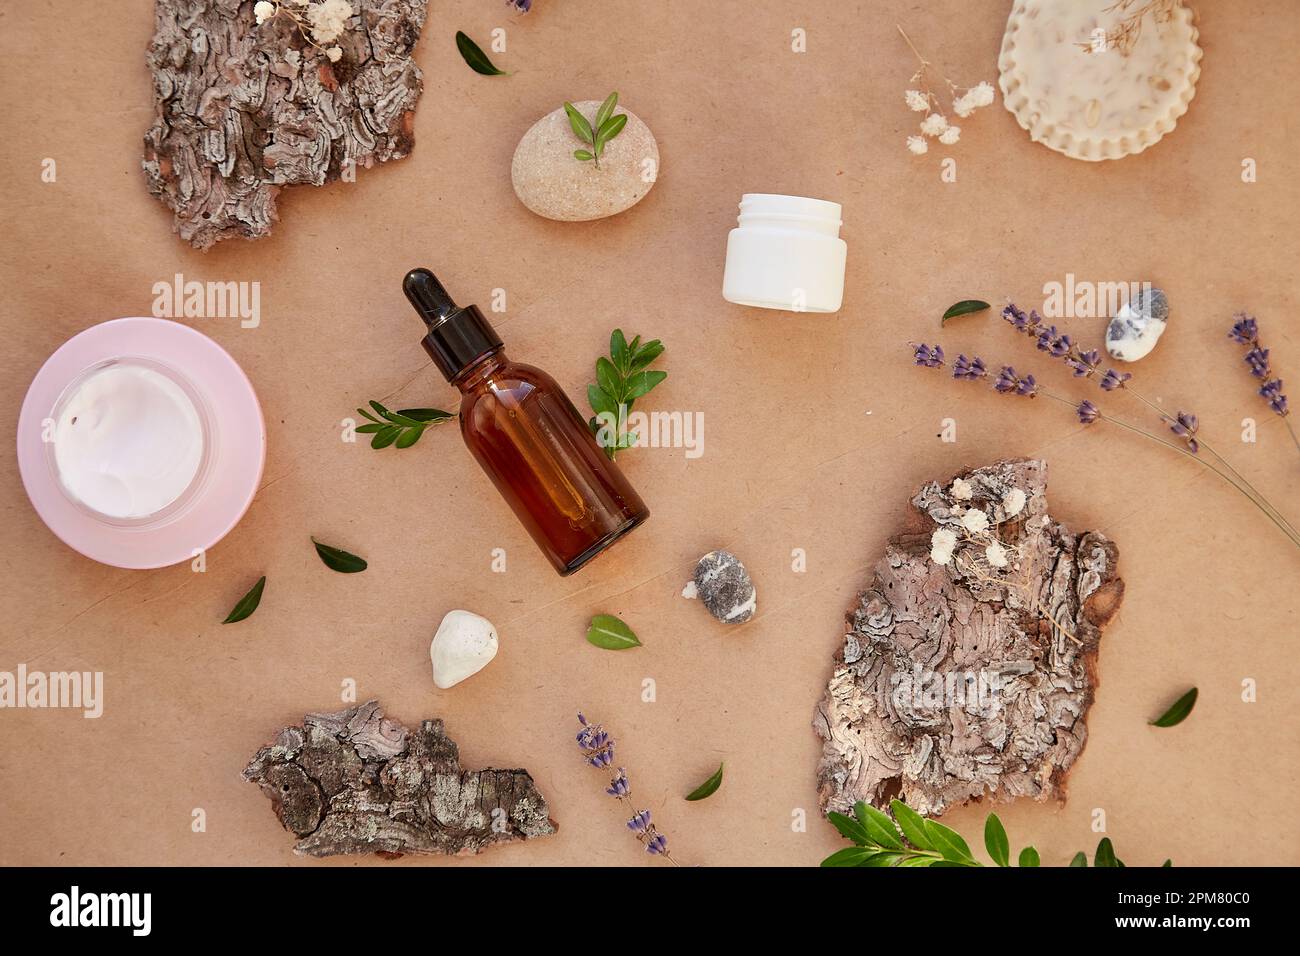 Dropper serum glass bottle of hyaluronic acid, mucin cream, natural oat soap. Natural beauty treatments Stock Photo